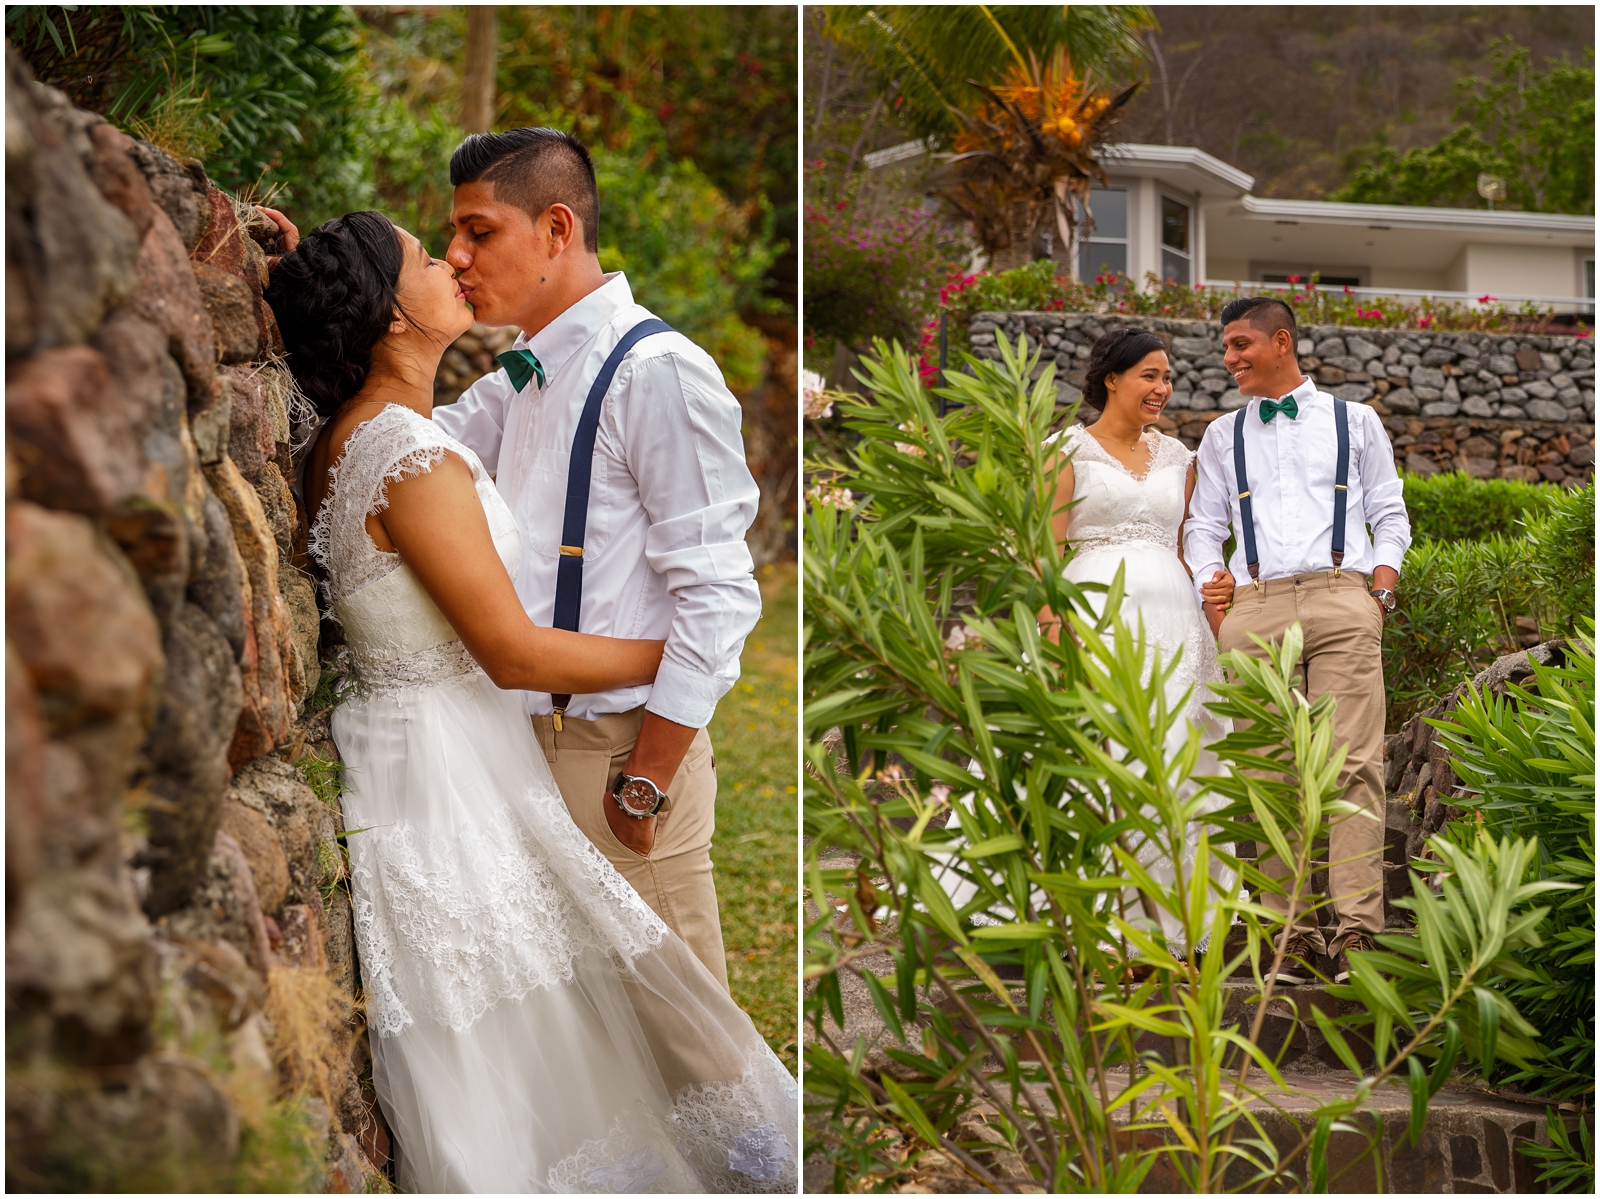 Epic airbnb venue in Nicaragua for this couple's small wedding.